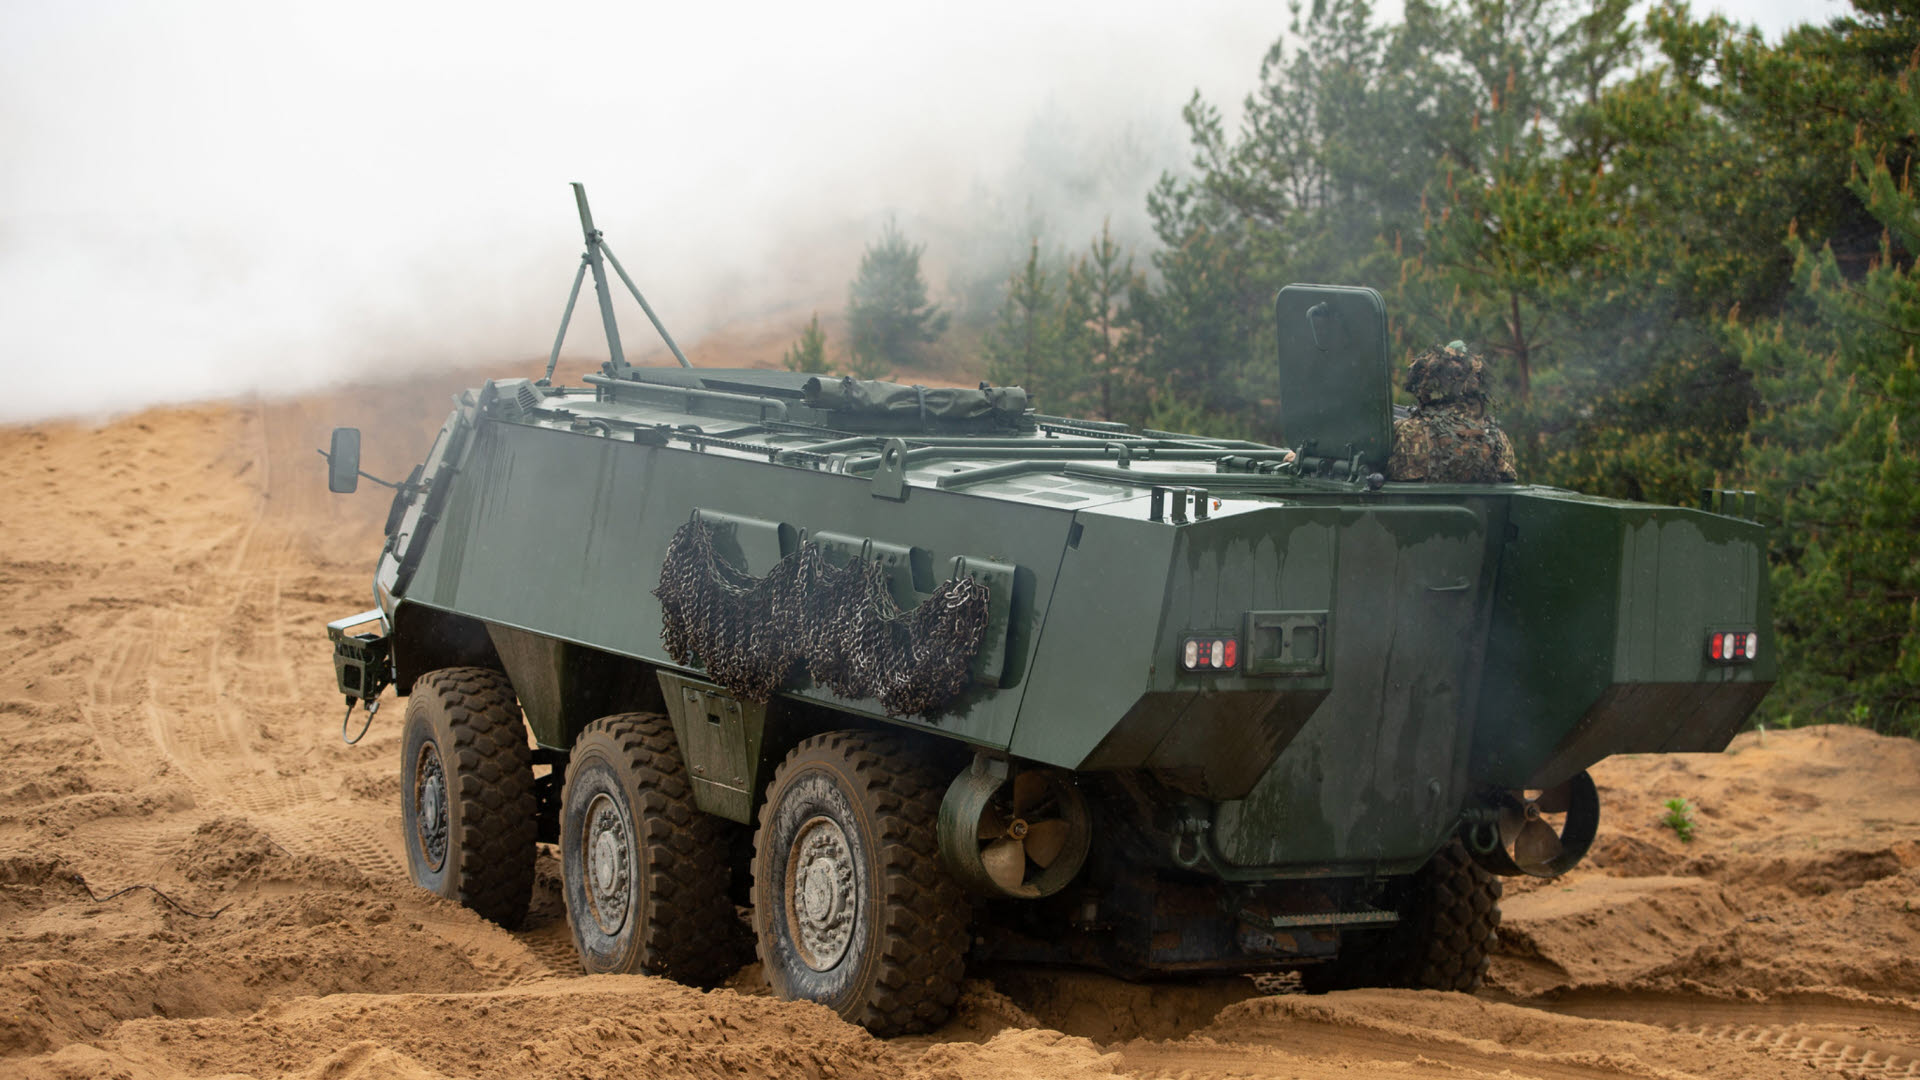 Common Armored Vehicle System based on Patria 6x6 vehicle. Photo: Swedish Armed Forces/Patria